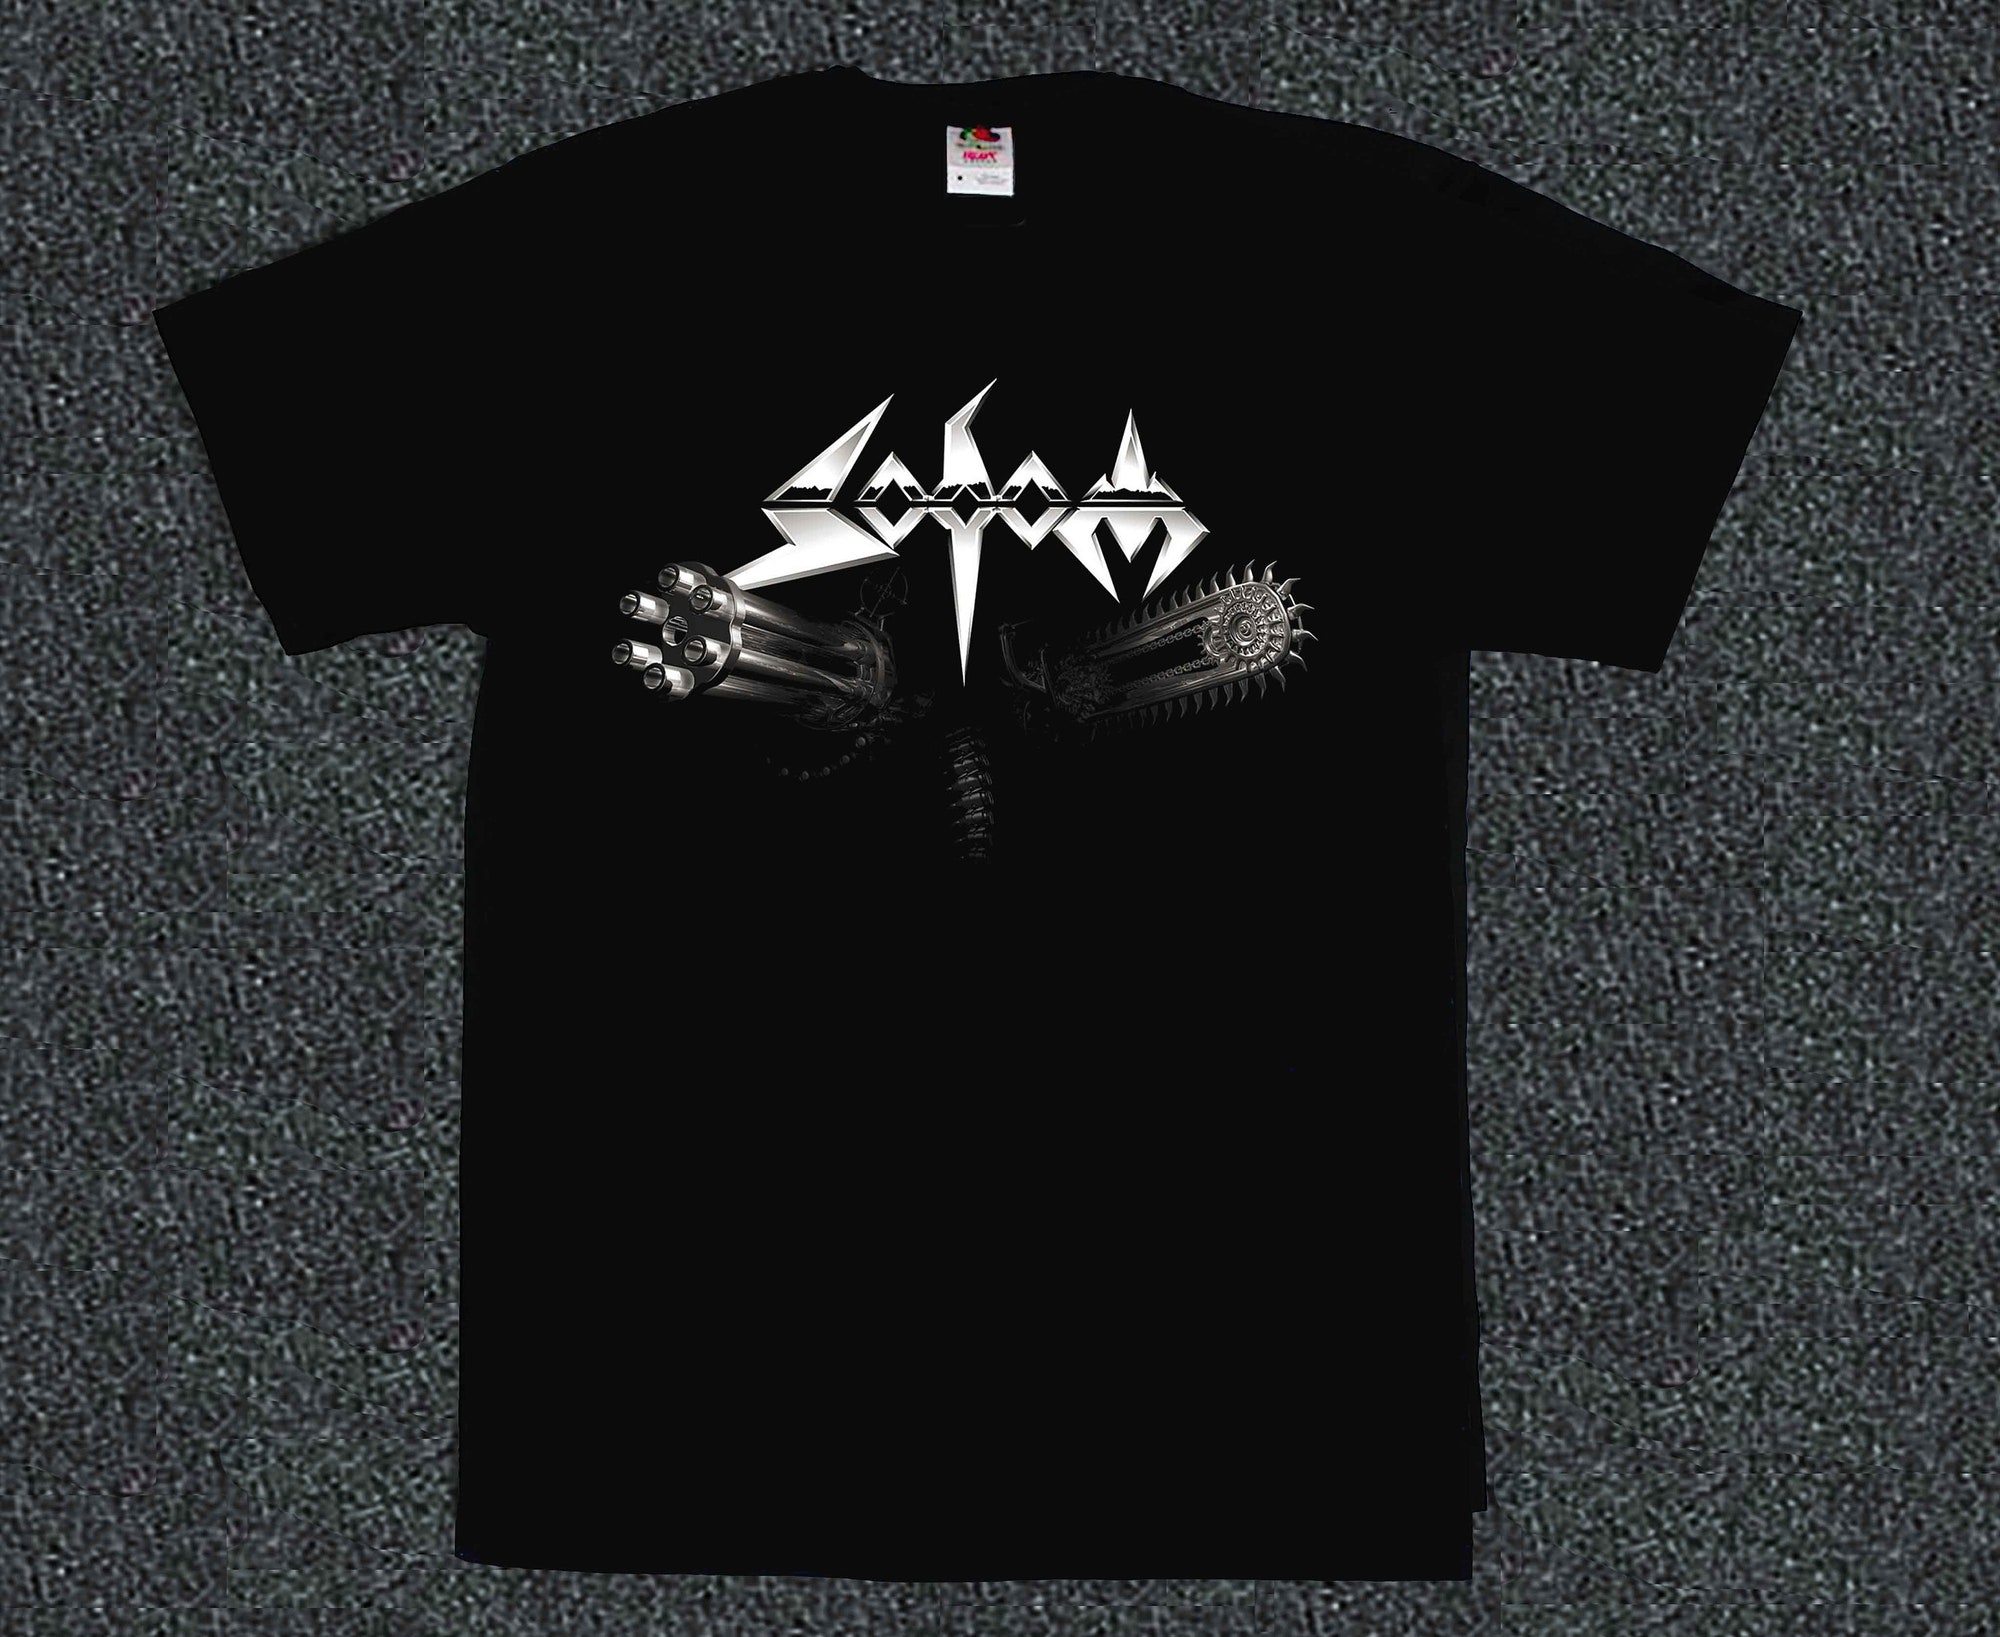 SODOM - Axis of Evil t-shirt